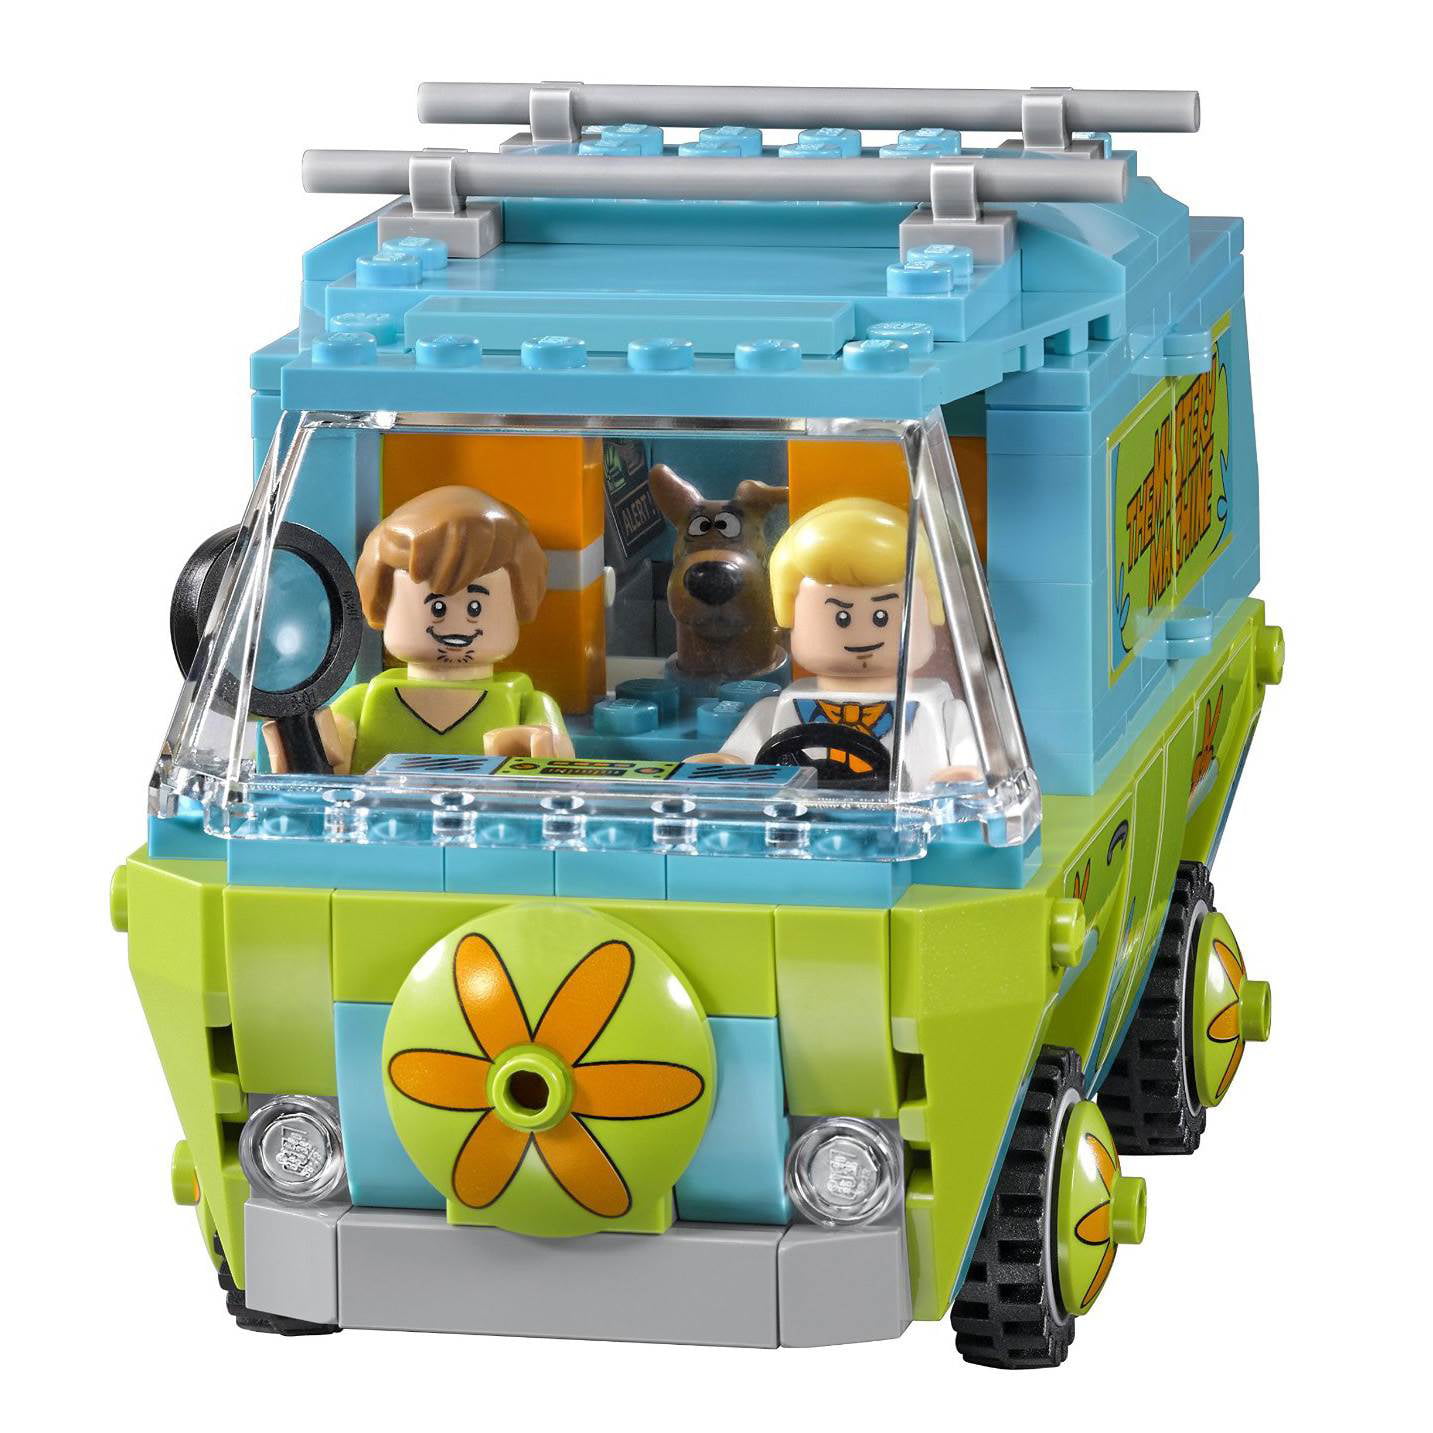 75902 Lego Scooby-Doo The Mystery Machine for sale online